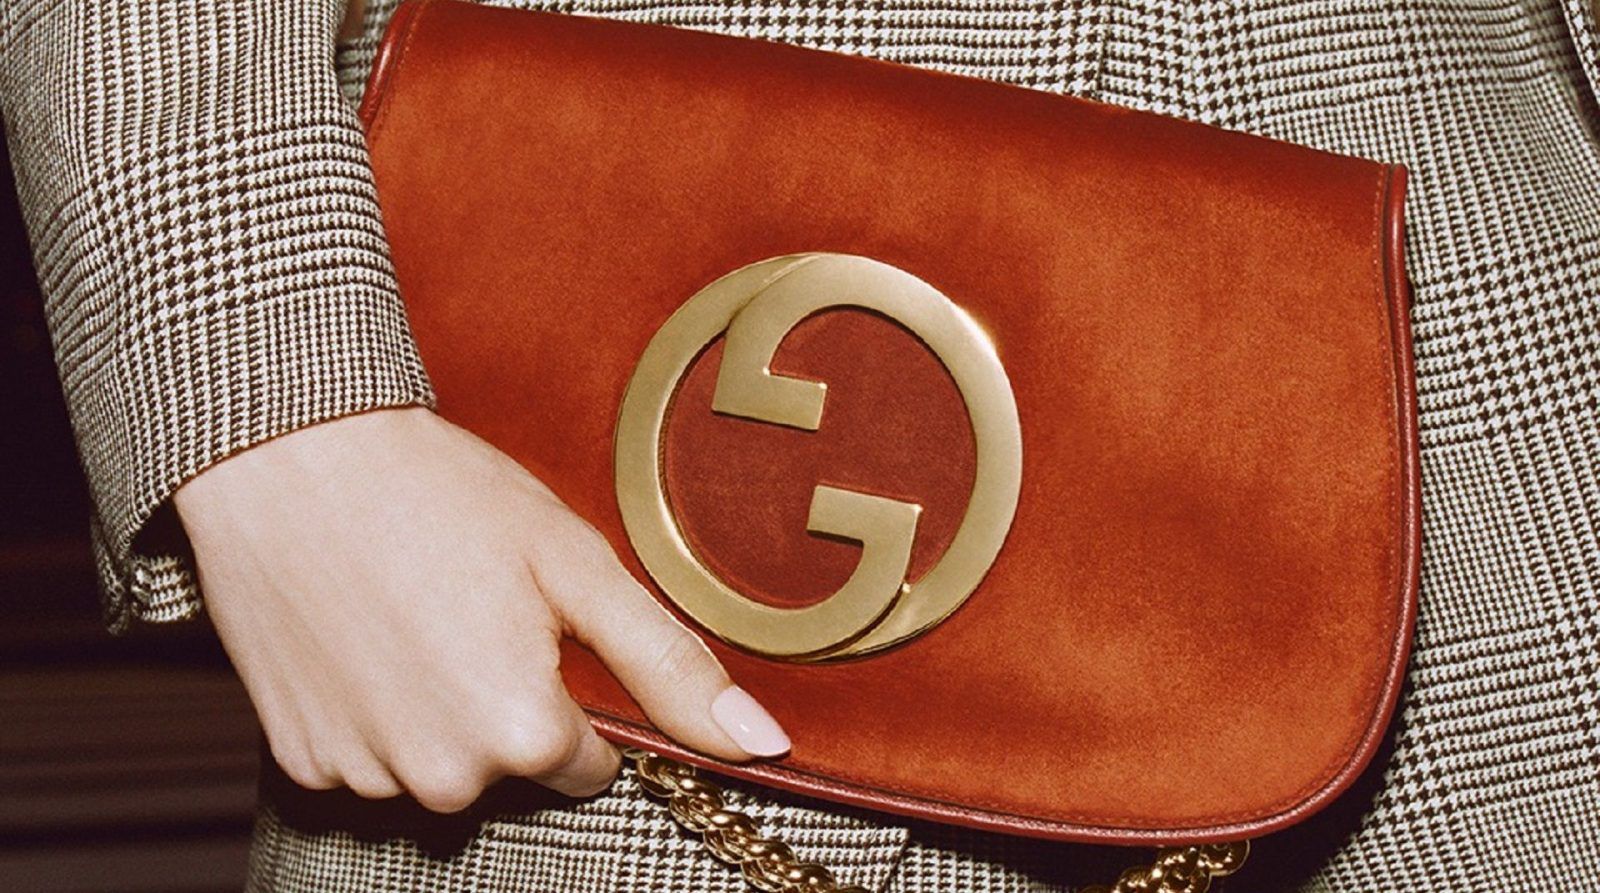 Gucci Ends Balenciaga’s Reign, Becomes World’s Hottest Brand in The Lyst Index Q2 2022